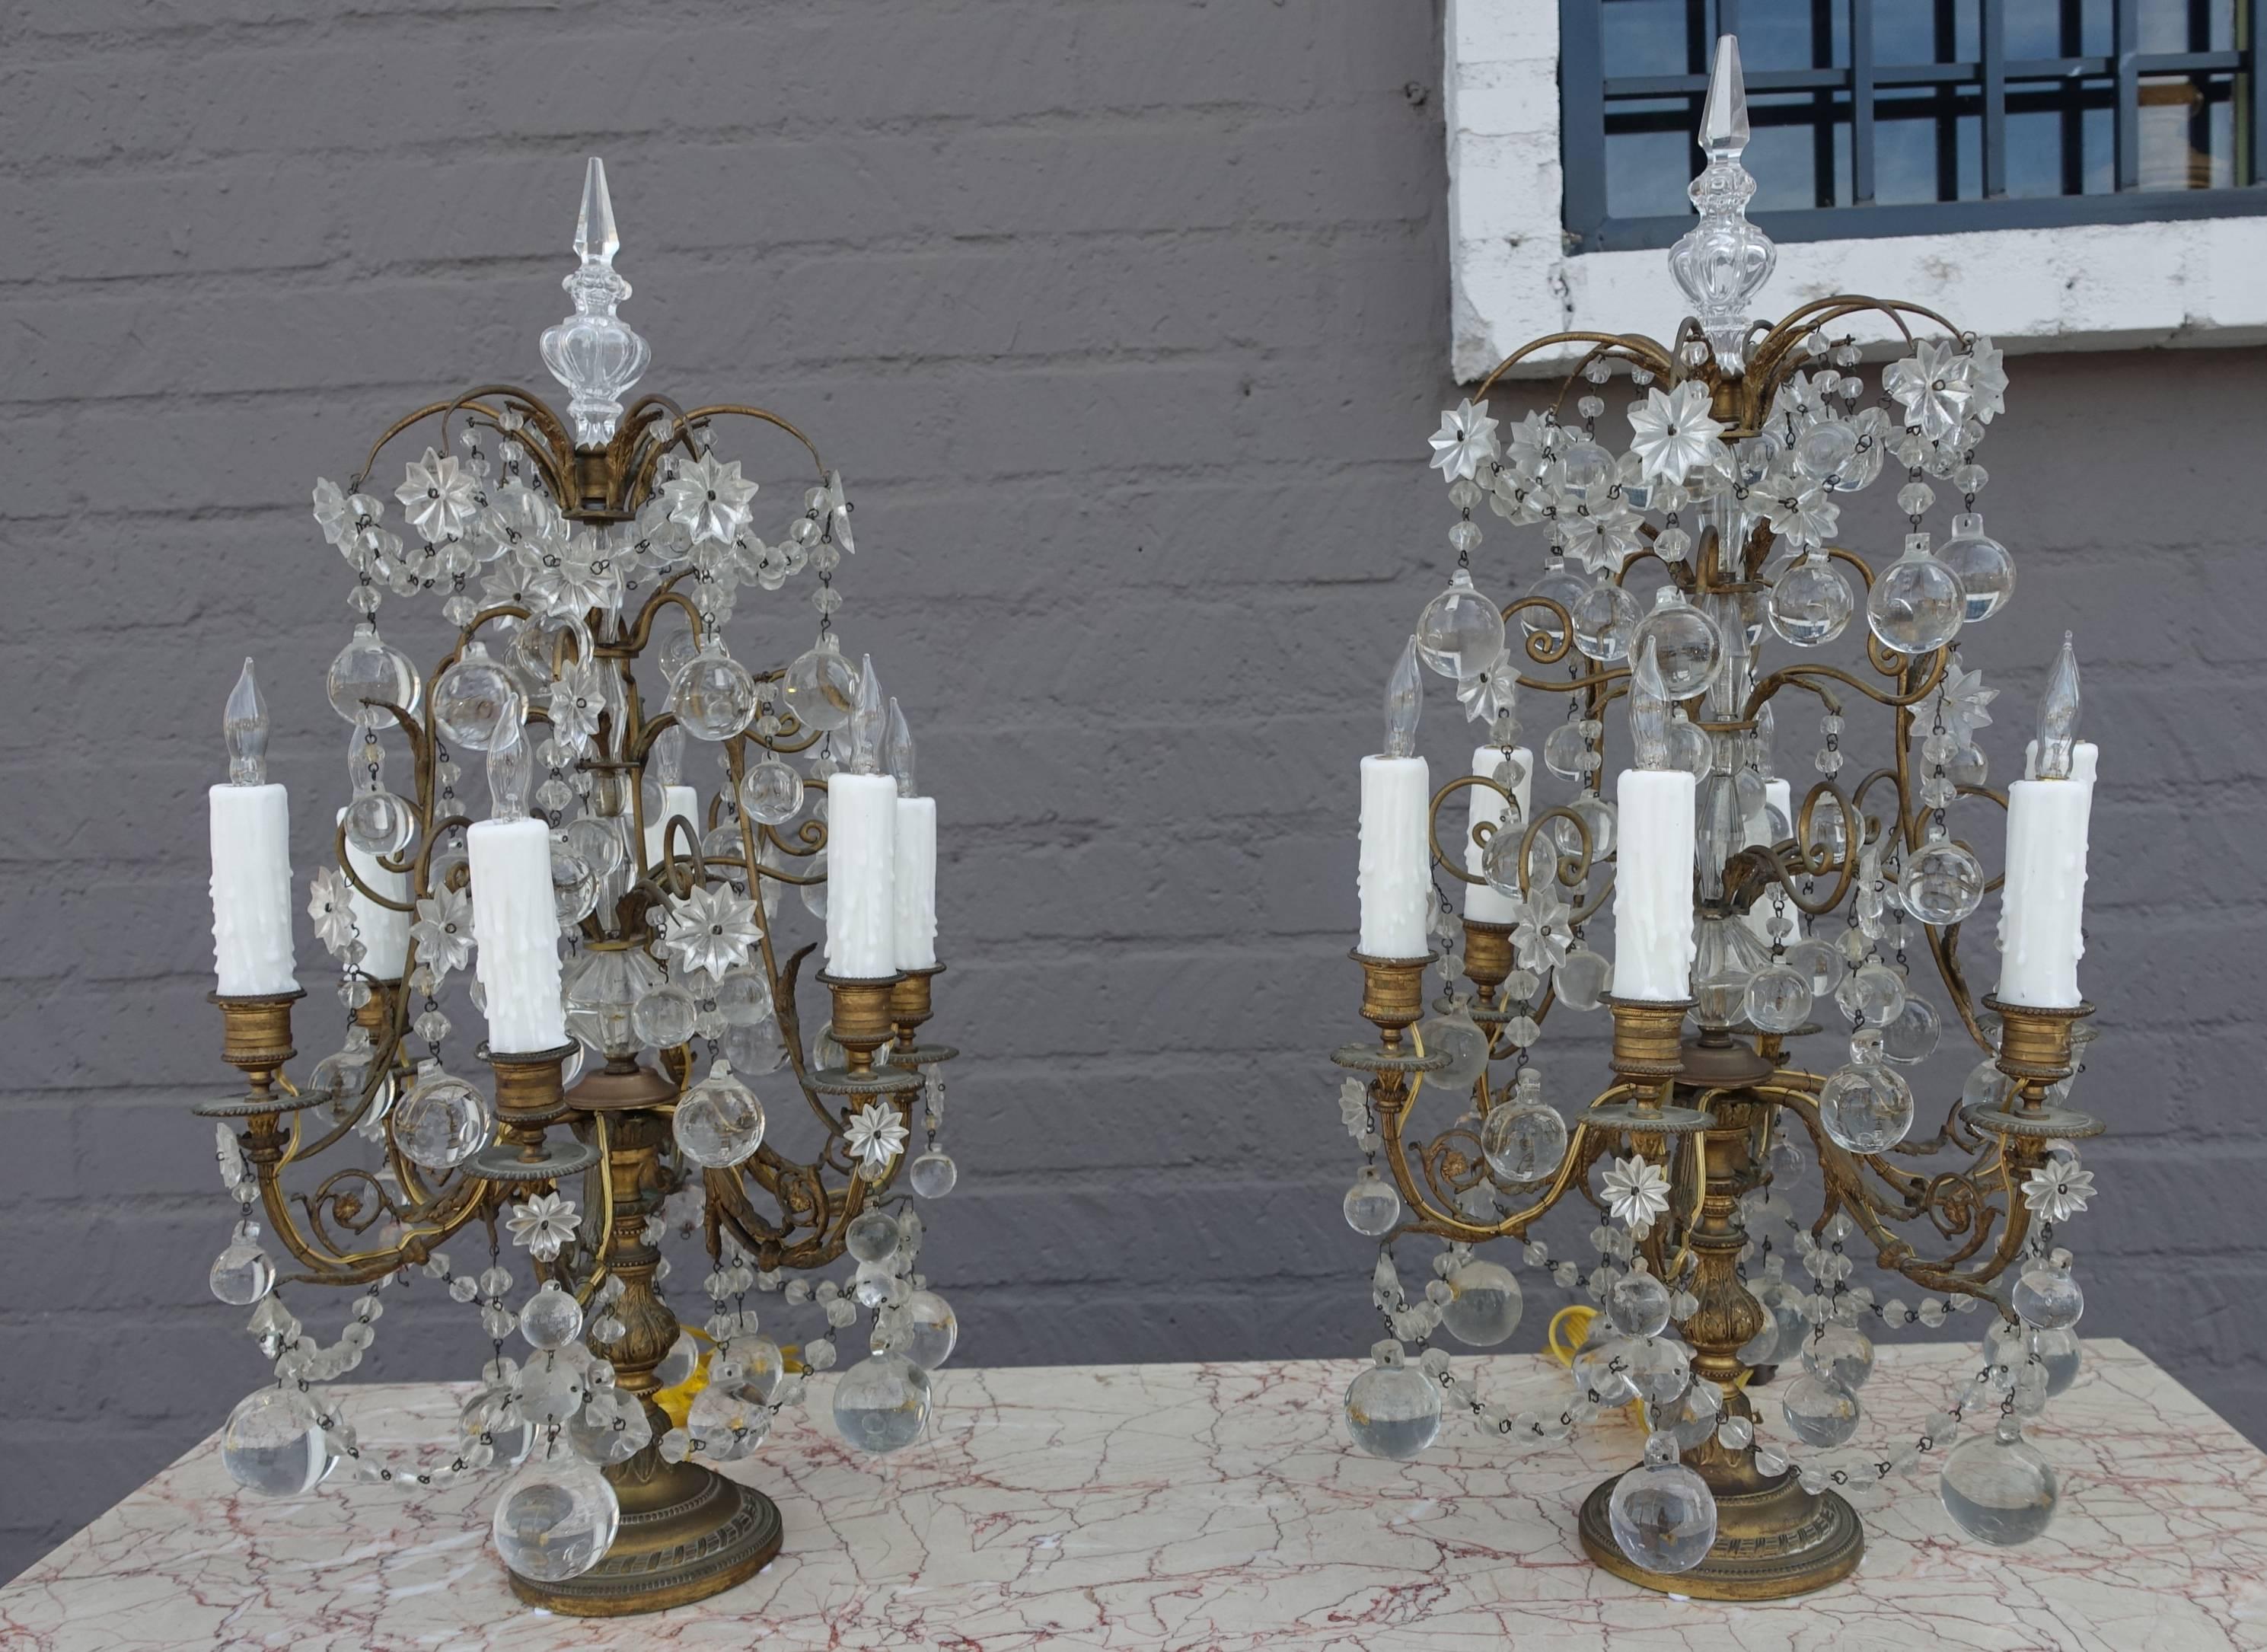 Pair of French six-light bronze and crystal girandoles adorned with garlands of beads, crystal stars and ball drops throughout. The lights have been newly rewired with drip wax candle covers.